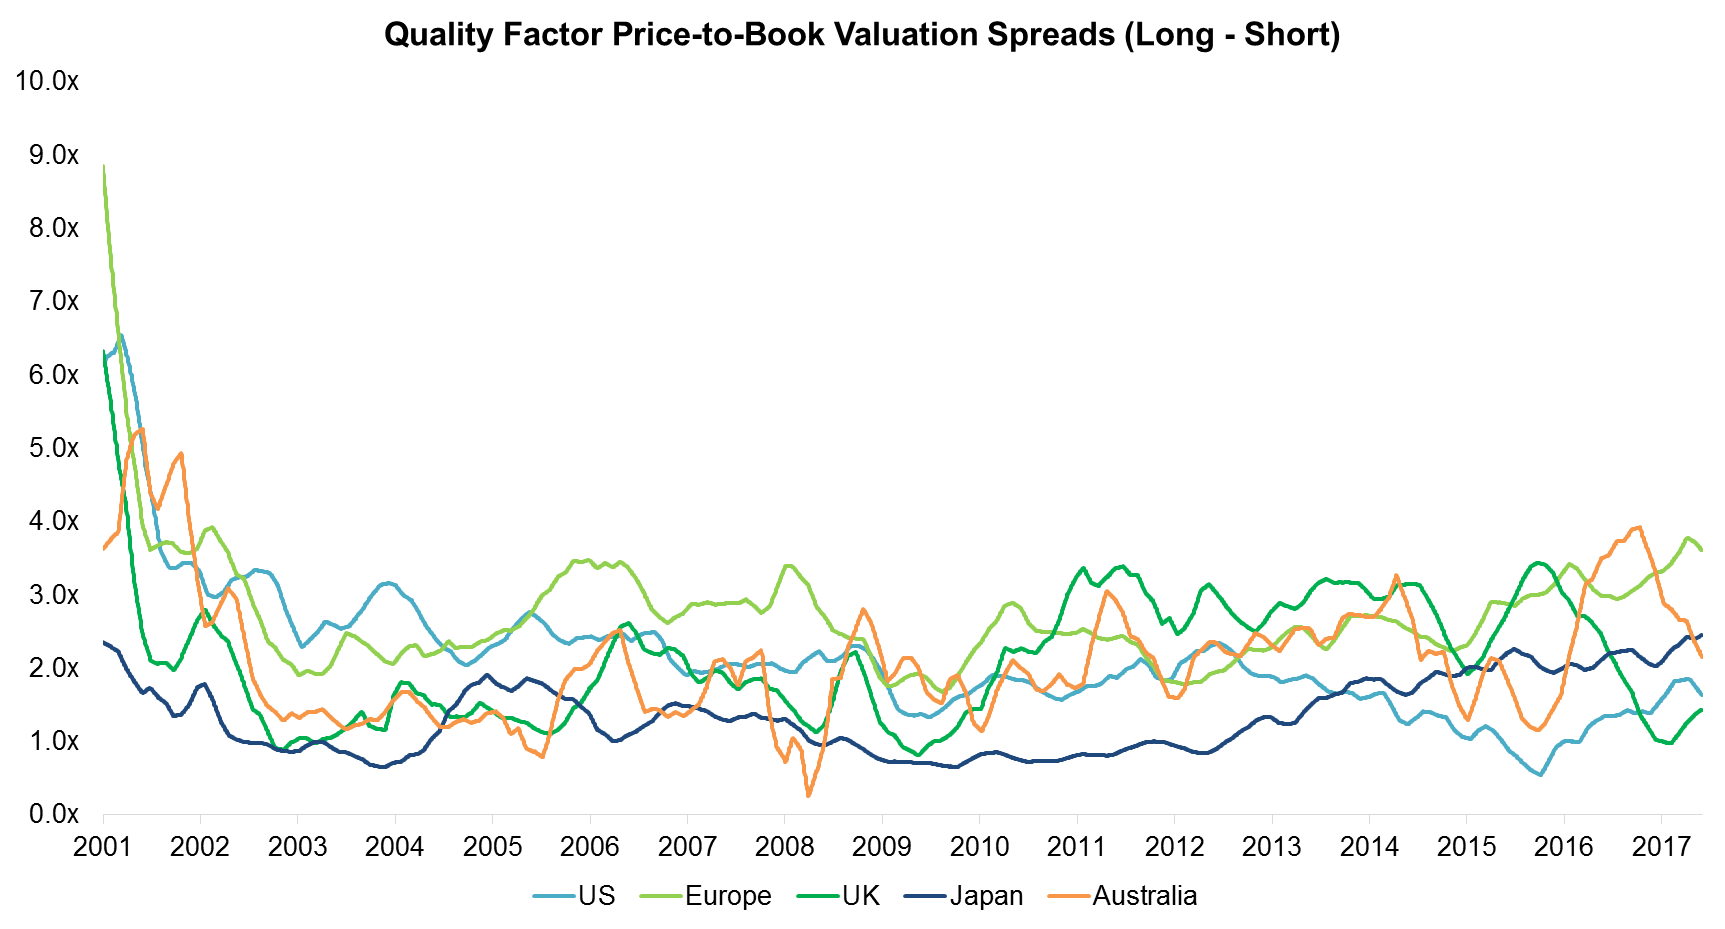 Quality Factor Price-to-Book Valuation Spreads (Long - Short)